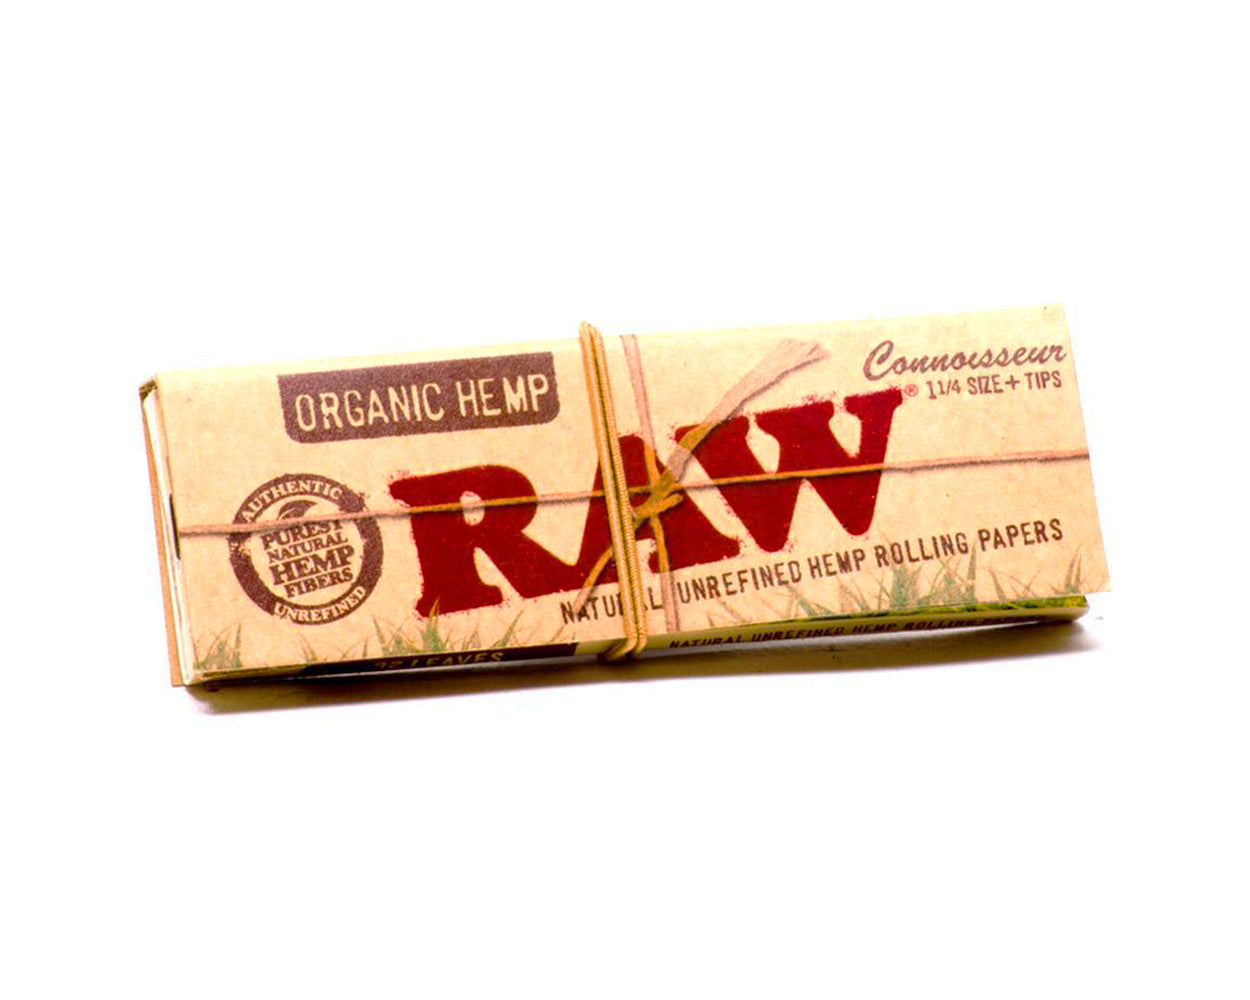 RAW | 'Retail Display' Connoisseur 1 1/4 Size Rolling Papers + Tips | 83mm - Organic Hemp - 24 Count - 2